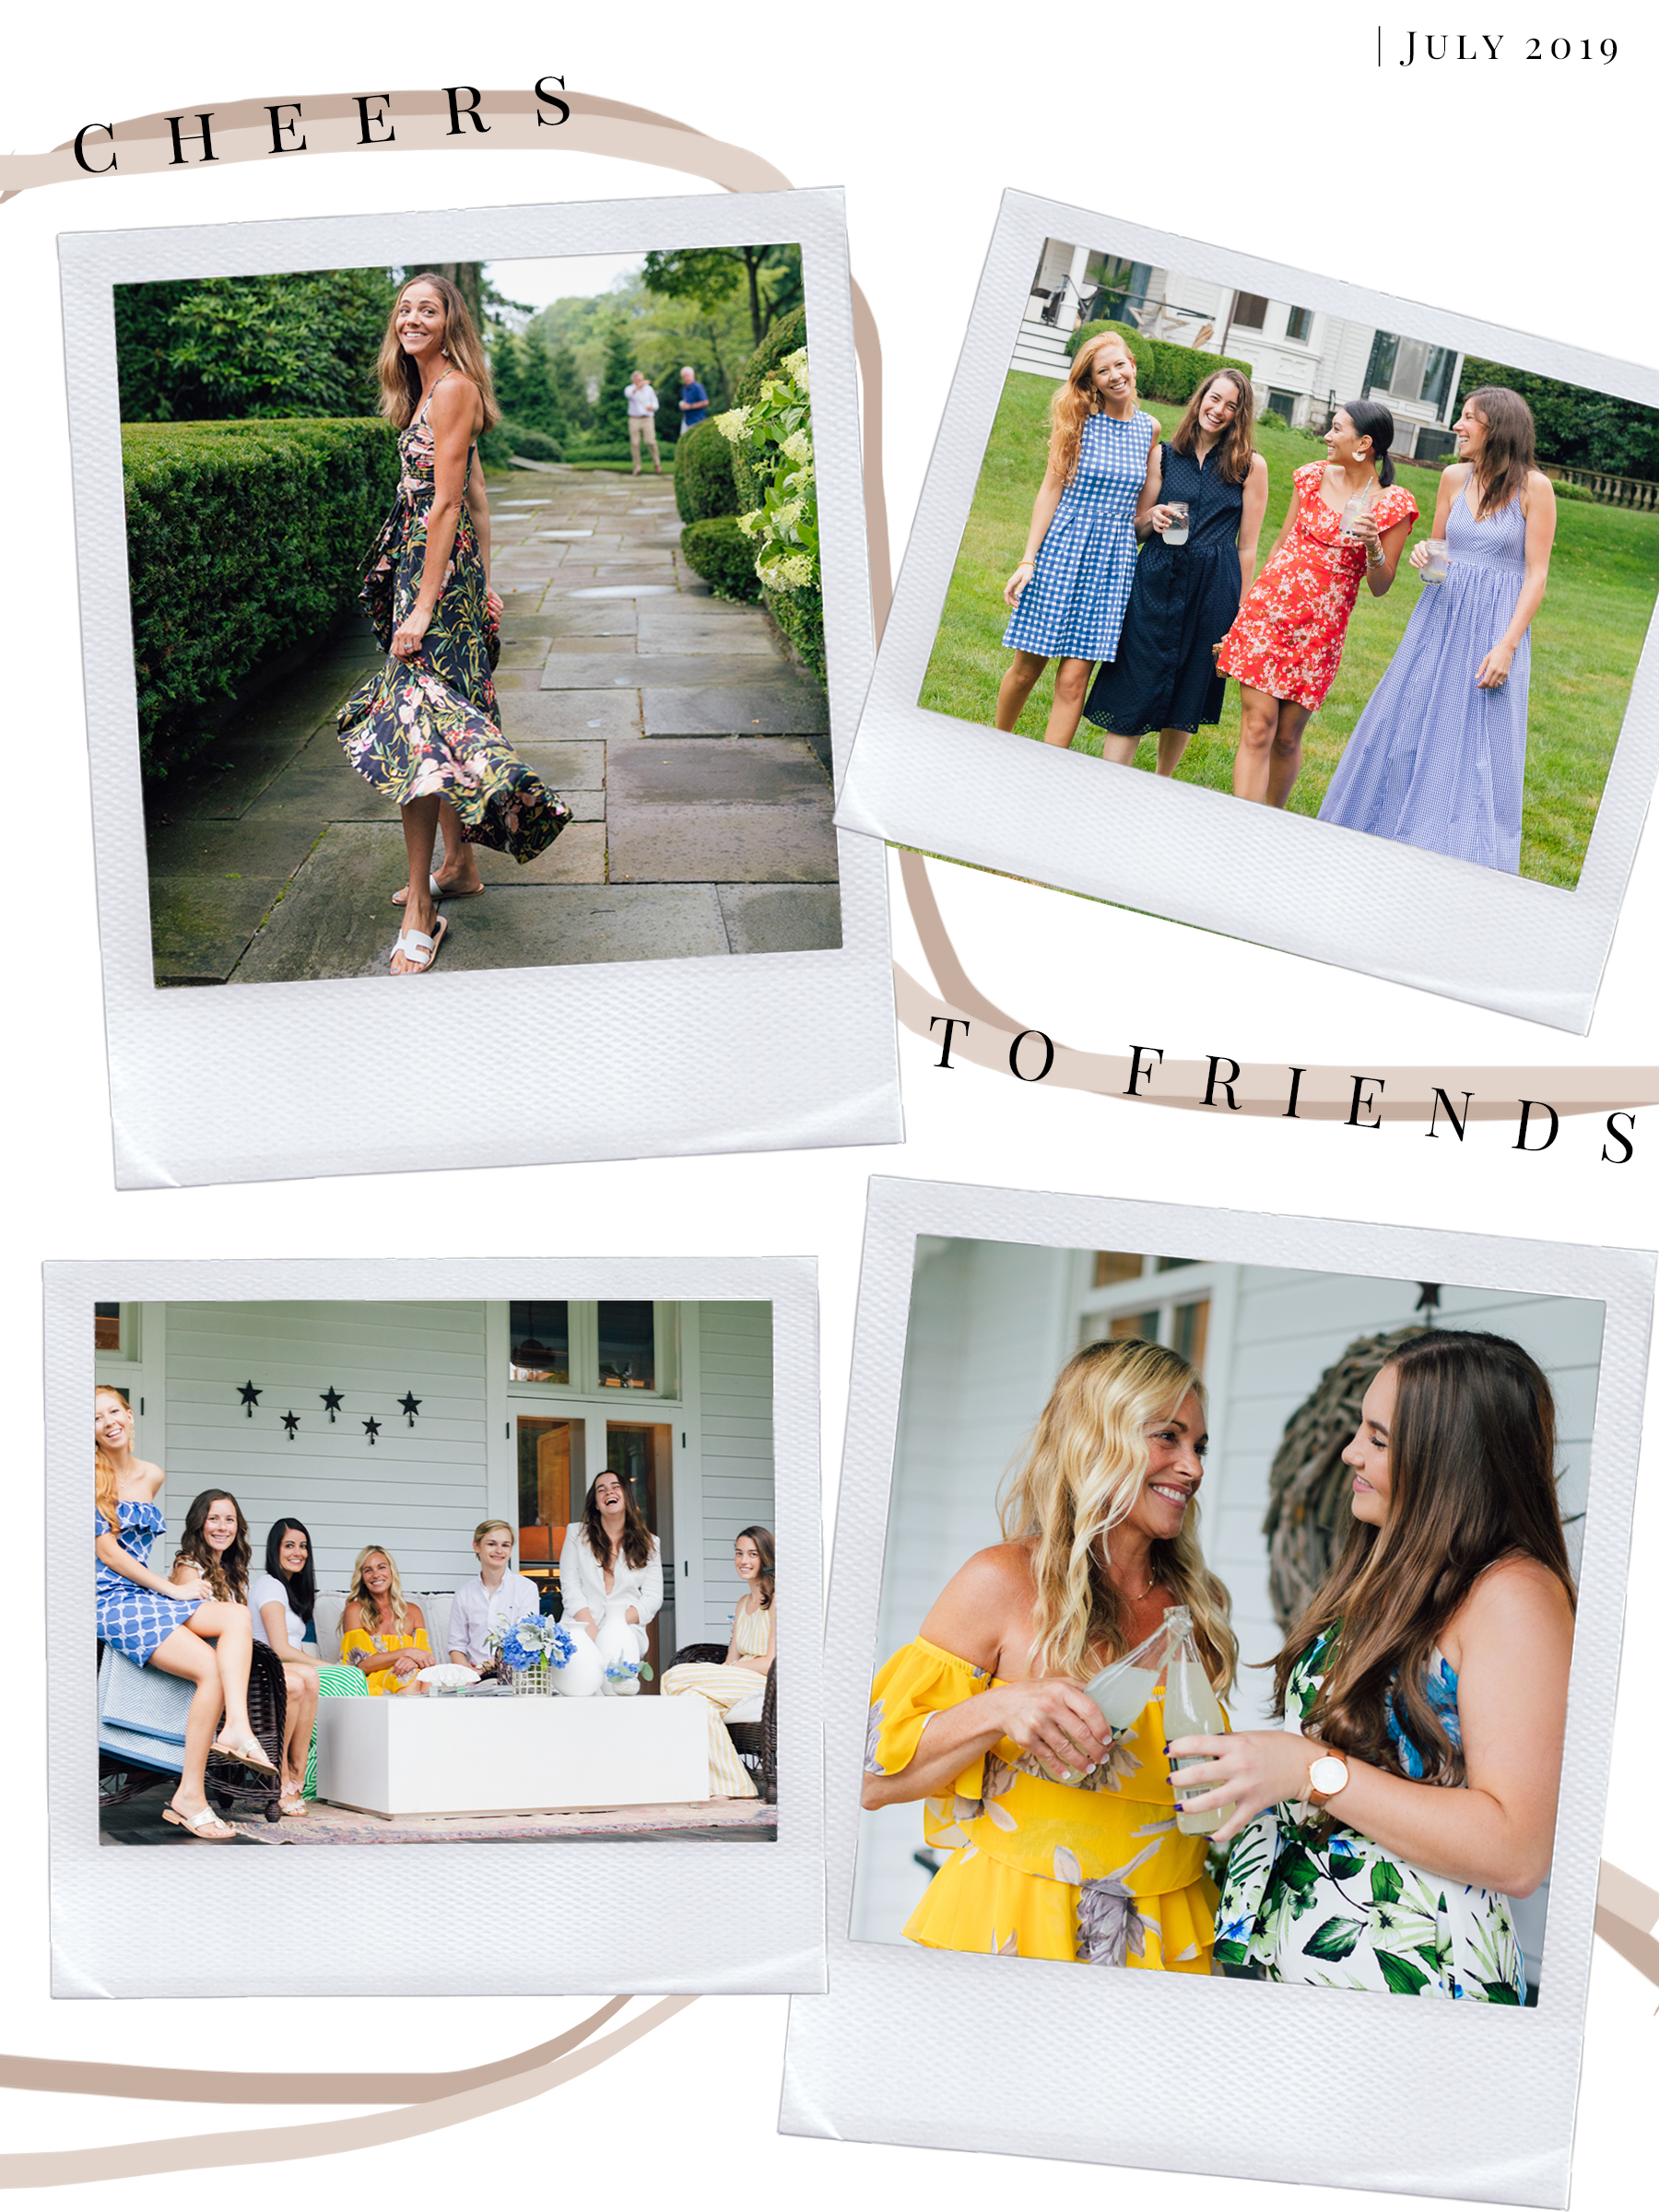 A Summer Soirée With My Favorite Connecticut Bloggers #summer #fashion #style #bloggers #bffs #connecticut #westchester #diorbag #outfitinspiration #styleinherited #bicoastalbrunette #bloggers #events #friends #summerstyle